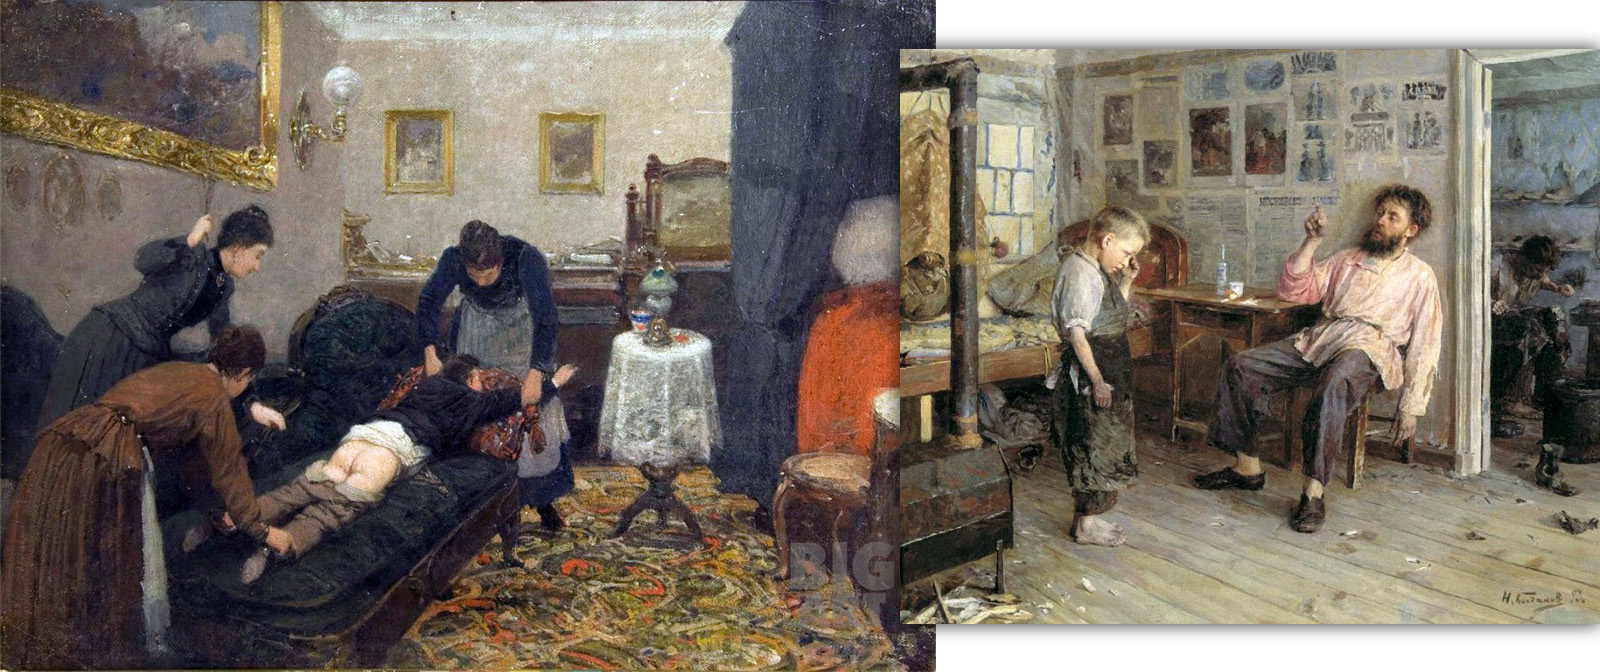 Little-known paintings of Russian itinerant artists, which will definitely not show in school textbooks. 